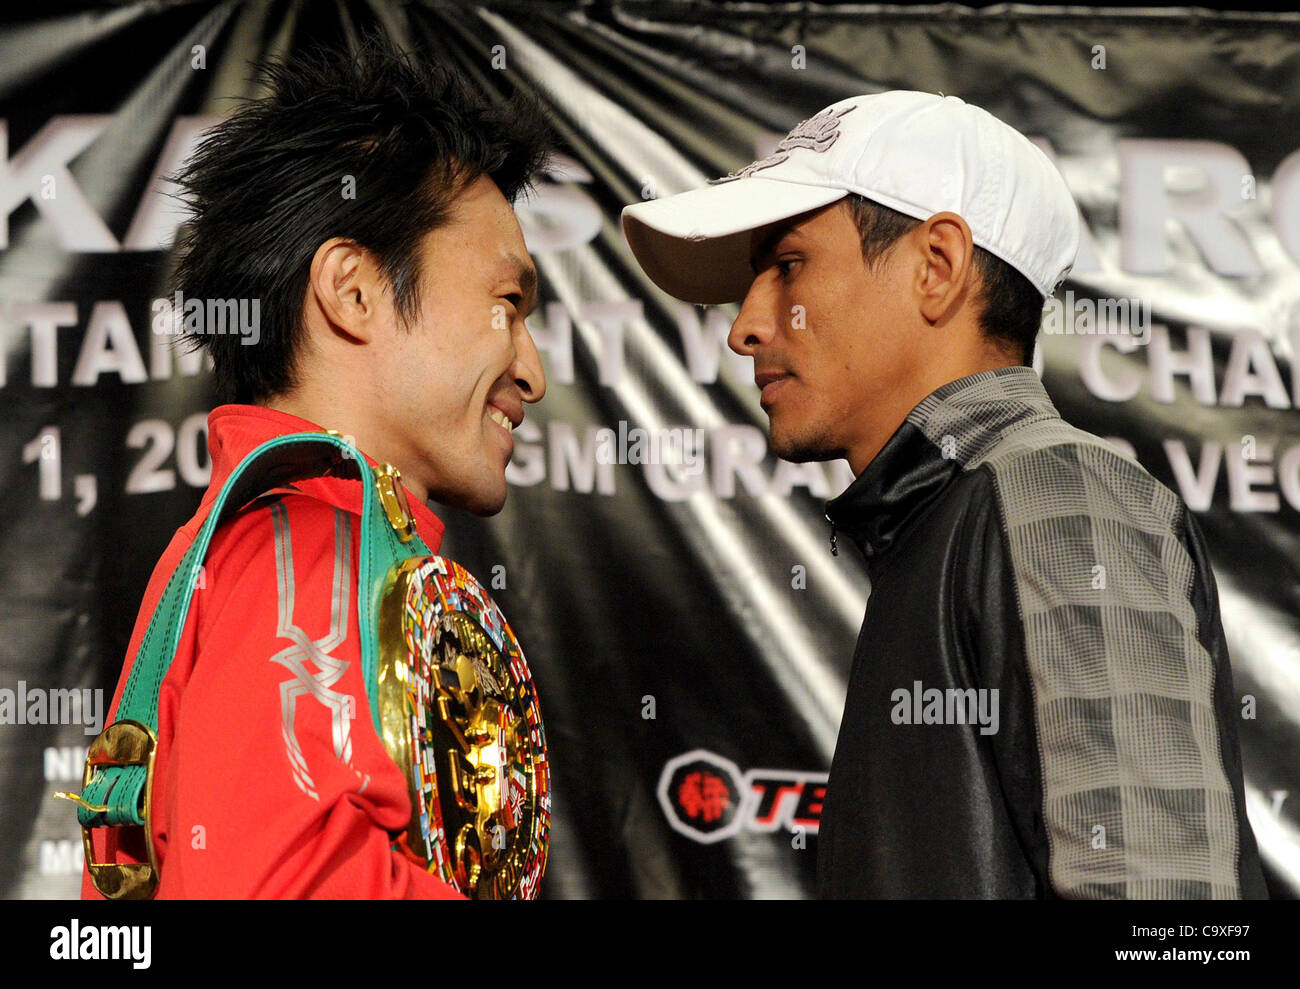 (L-R) Toshiaki Nishioka (JPN), Rafael Marquez (MEX), OCTOBER 1, 2011 - Boxing : Toshiaki Nishioka of Japan and Rafael Marquez of Mexico face off during the press conference for their title bout which will take place on October 1 at MGM Grand in Las Vegas, Nevada, United States. (Photo by Naoki Fukud Stock Photo